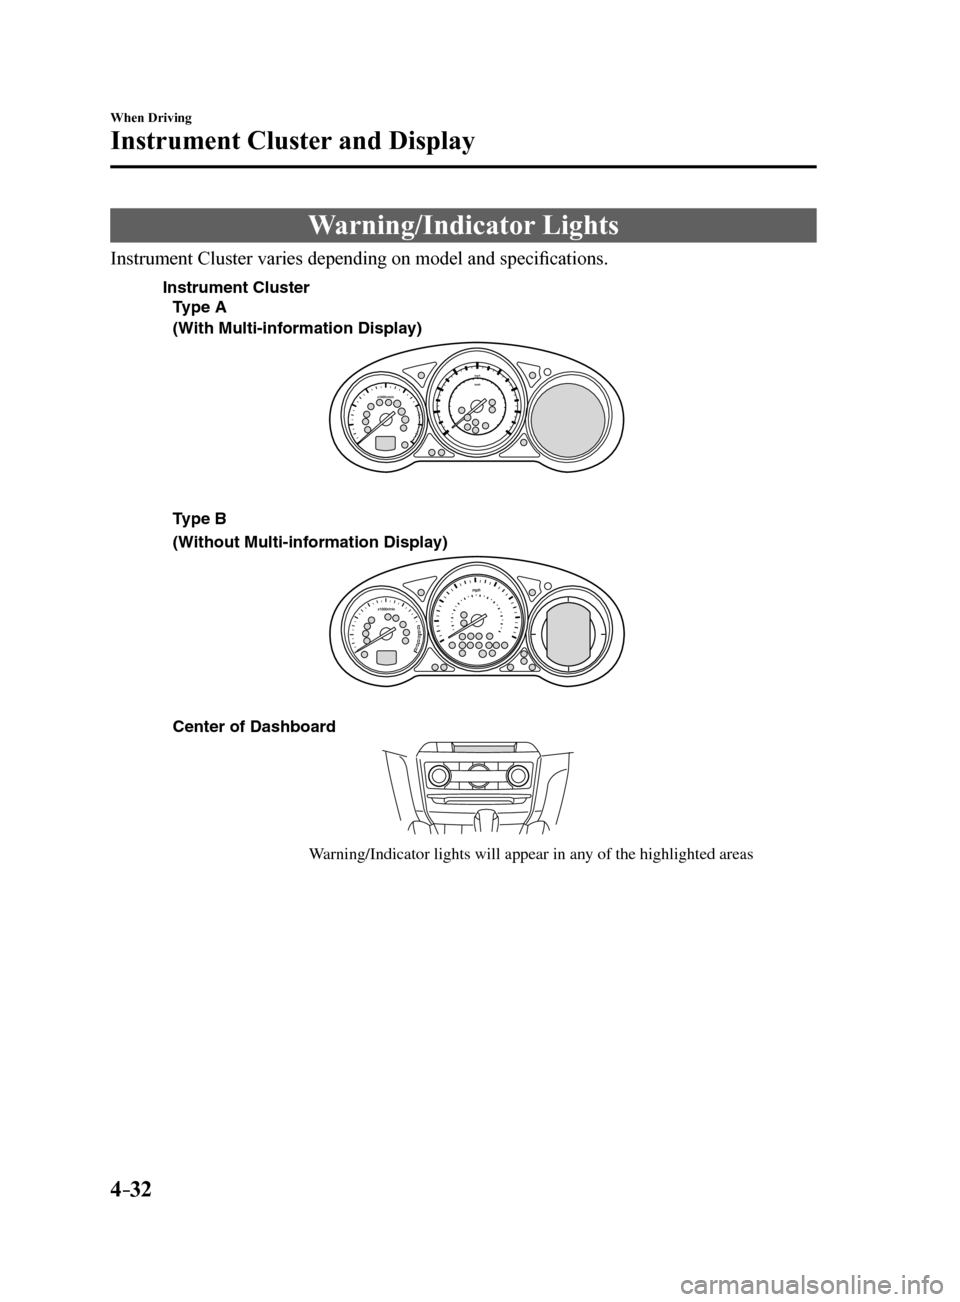 MAZDA MODEL 6 2017  Owners Manual (in English) 4–32
When Driving
Instrument Cluster and Display
Warning/Indicator Lights
Instrument Cluster varies depending on model and specifications.
Center of Dashboard
W arning/Indicator lights will appear i